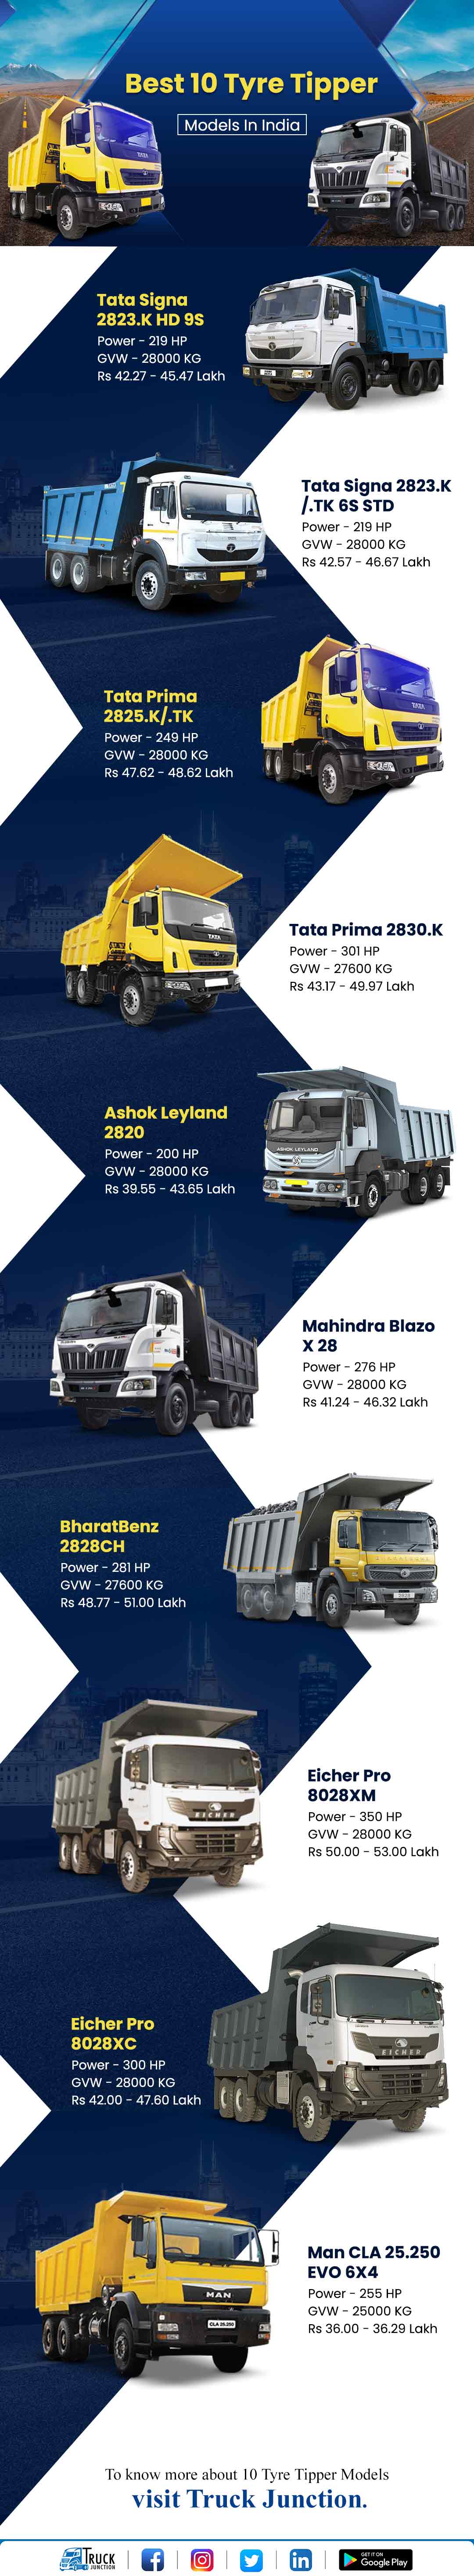 10 Tyre Tipper Models infographic